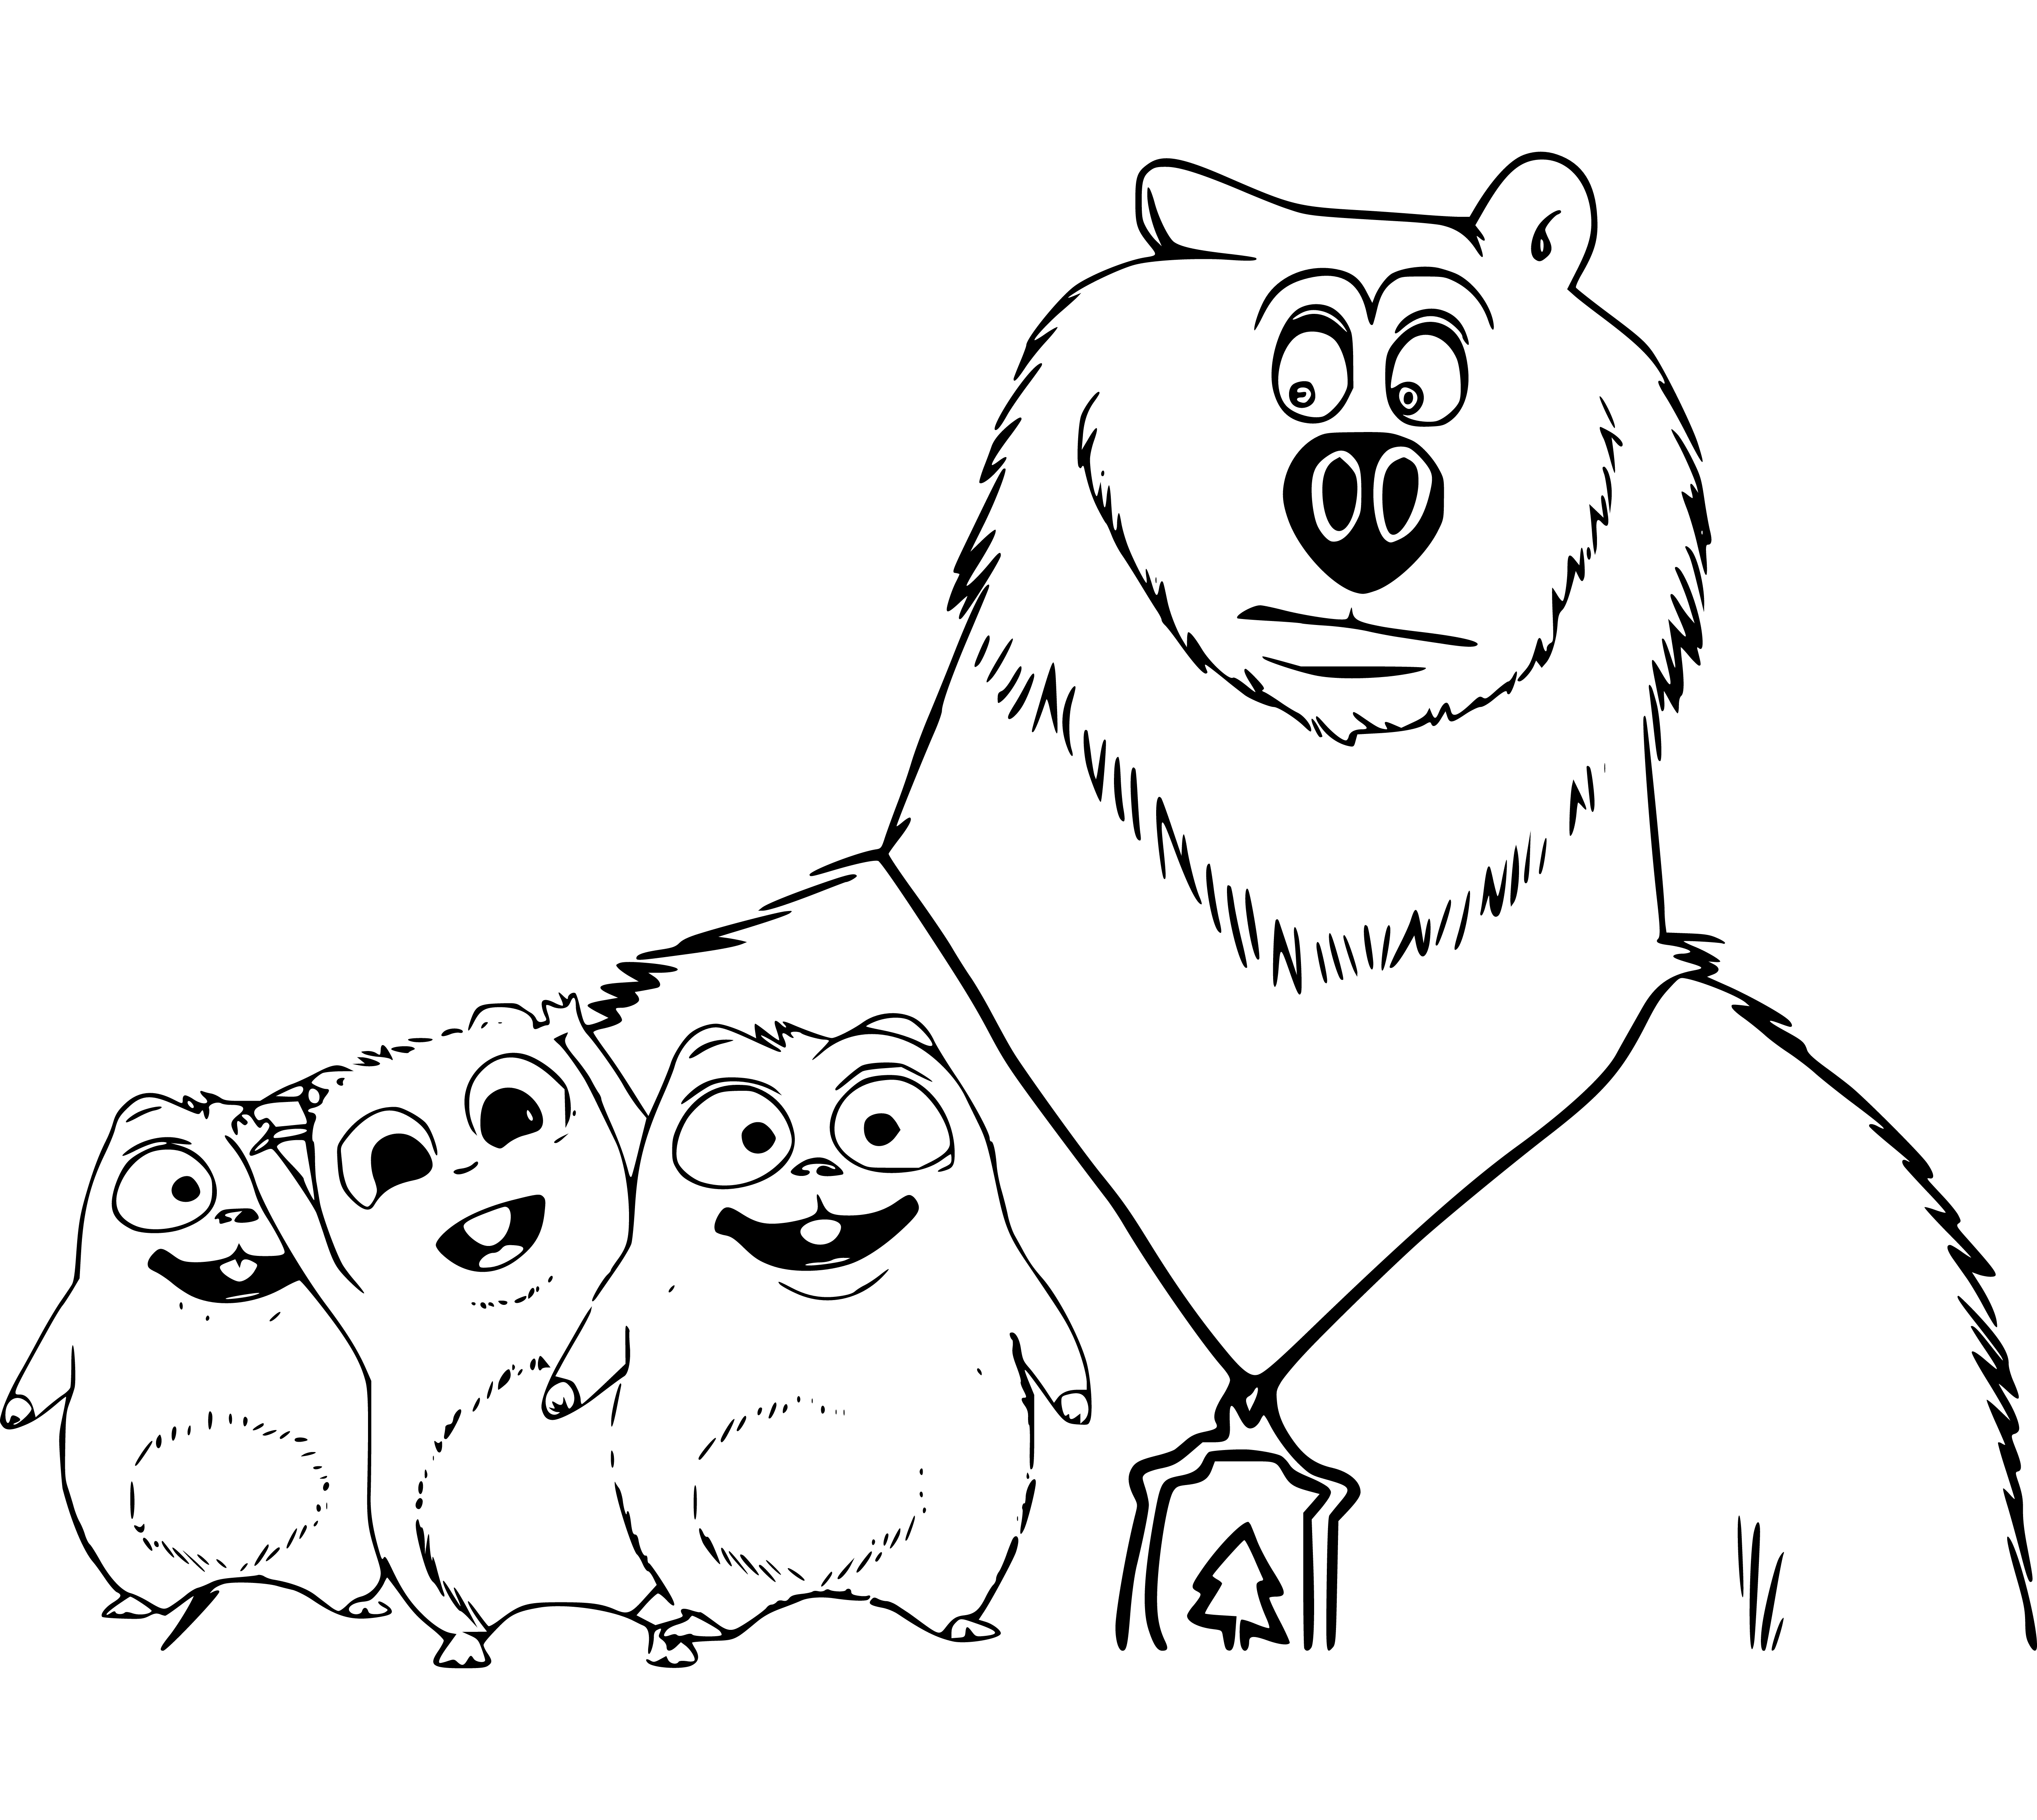 Grizzy and the Lemmings Coloring Page 4